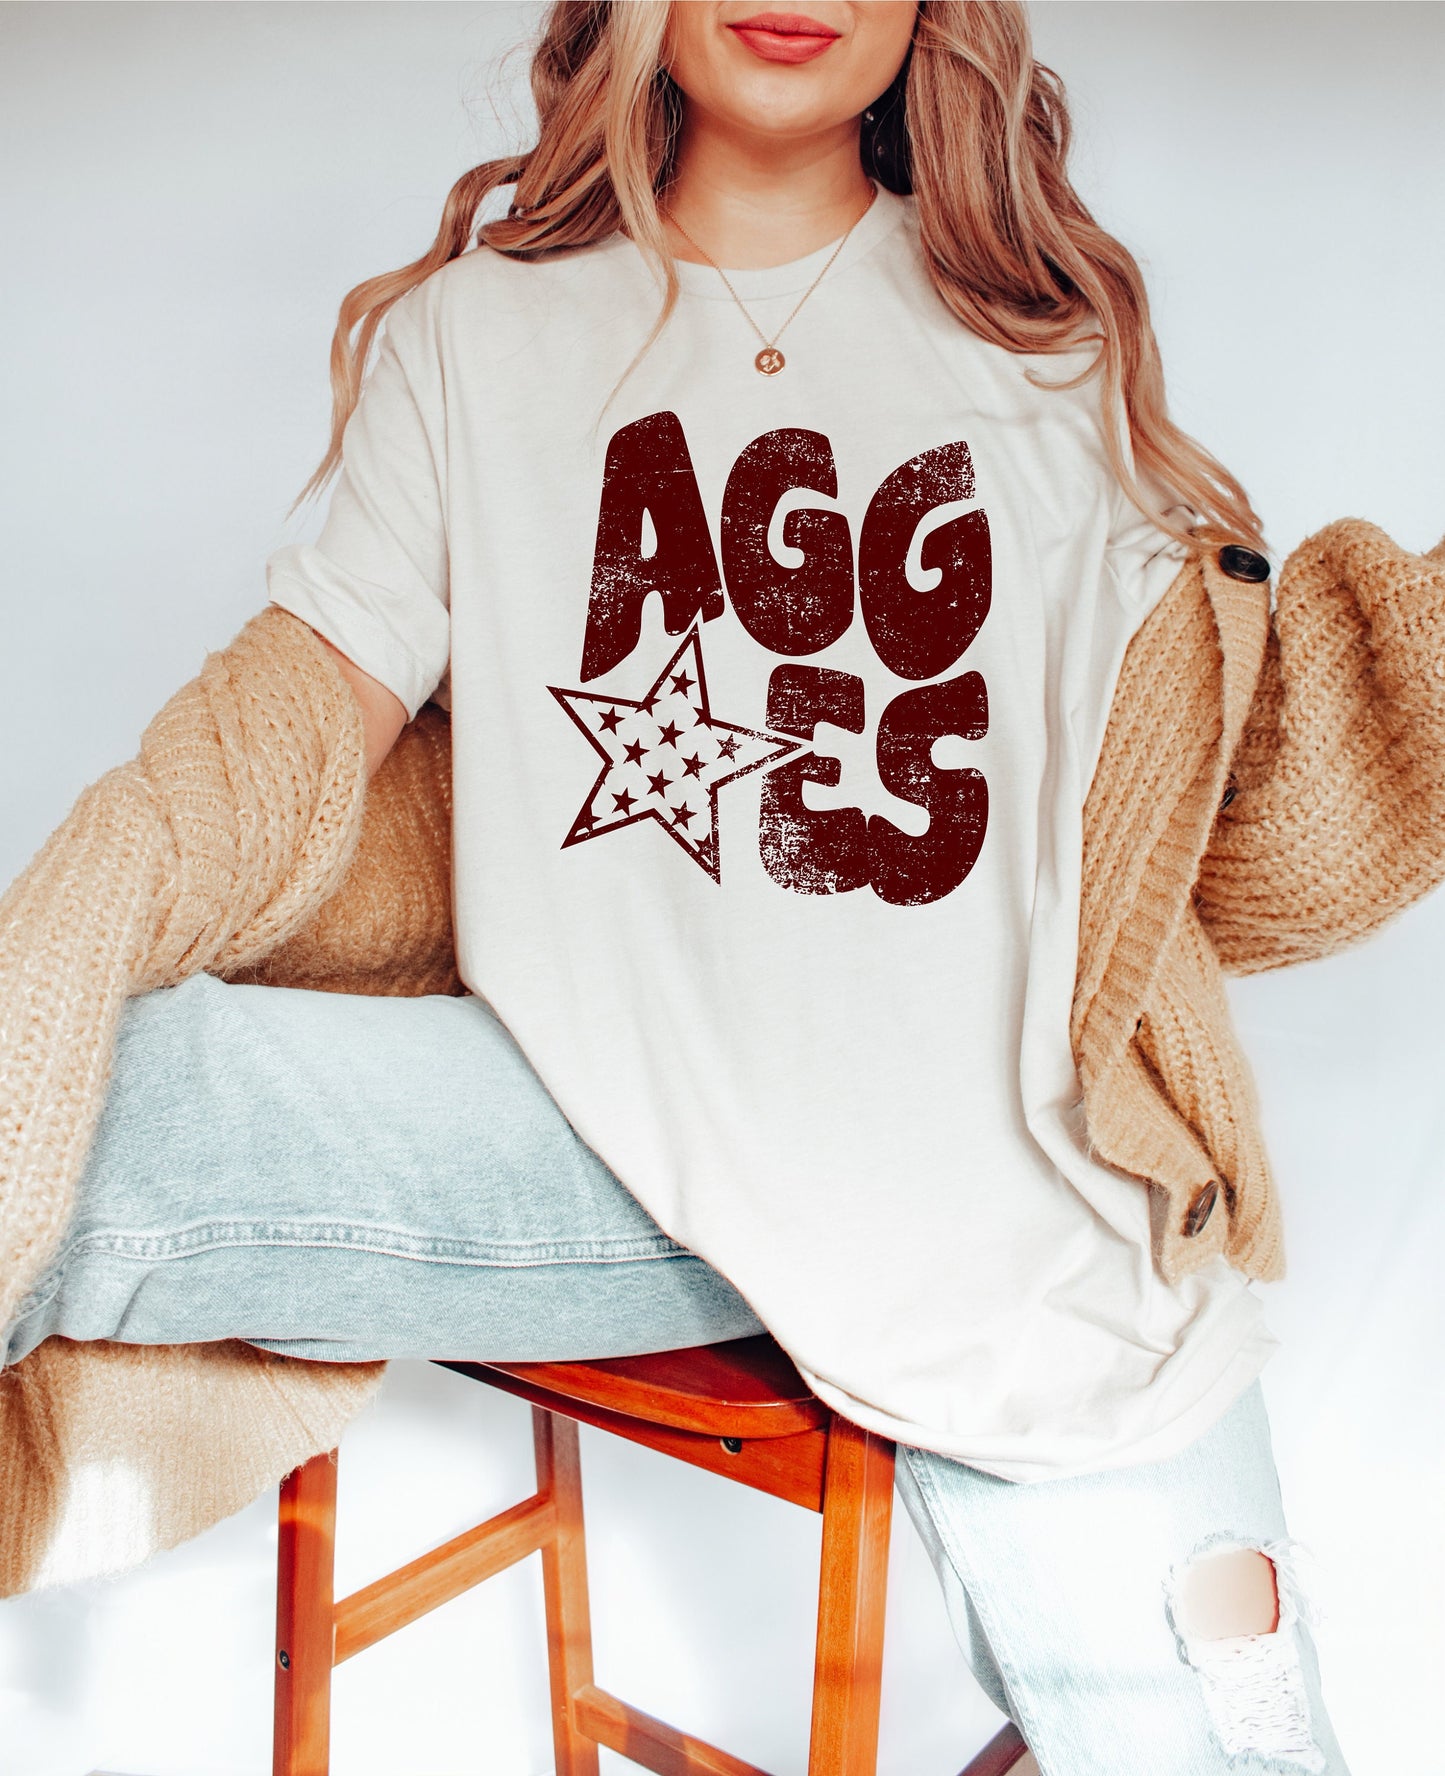 Aggies Distressed Star PNG, Aggies png, Retro Wavy Letter Digital Design